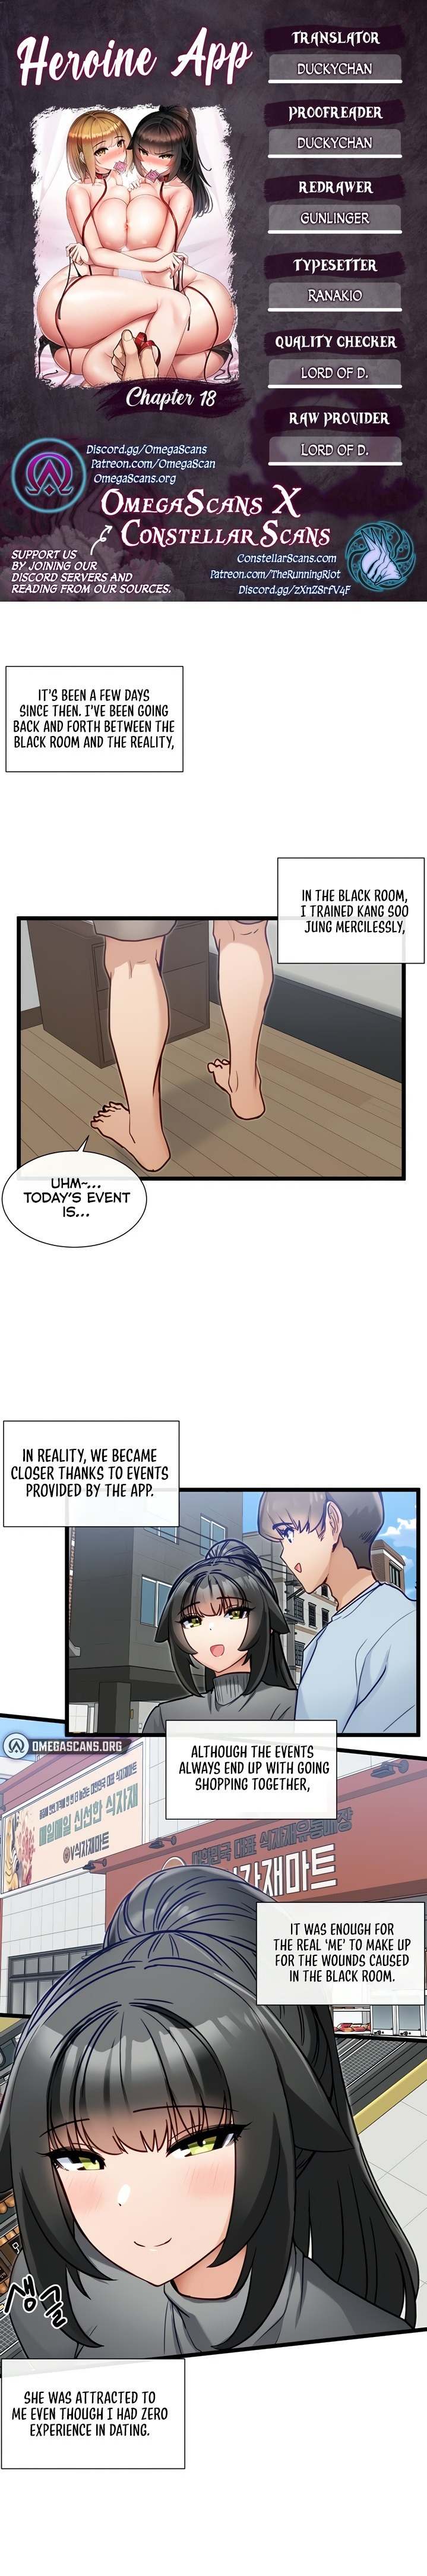 Heroine App - Chapter 18 Page 1